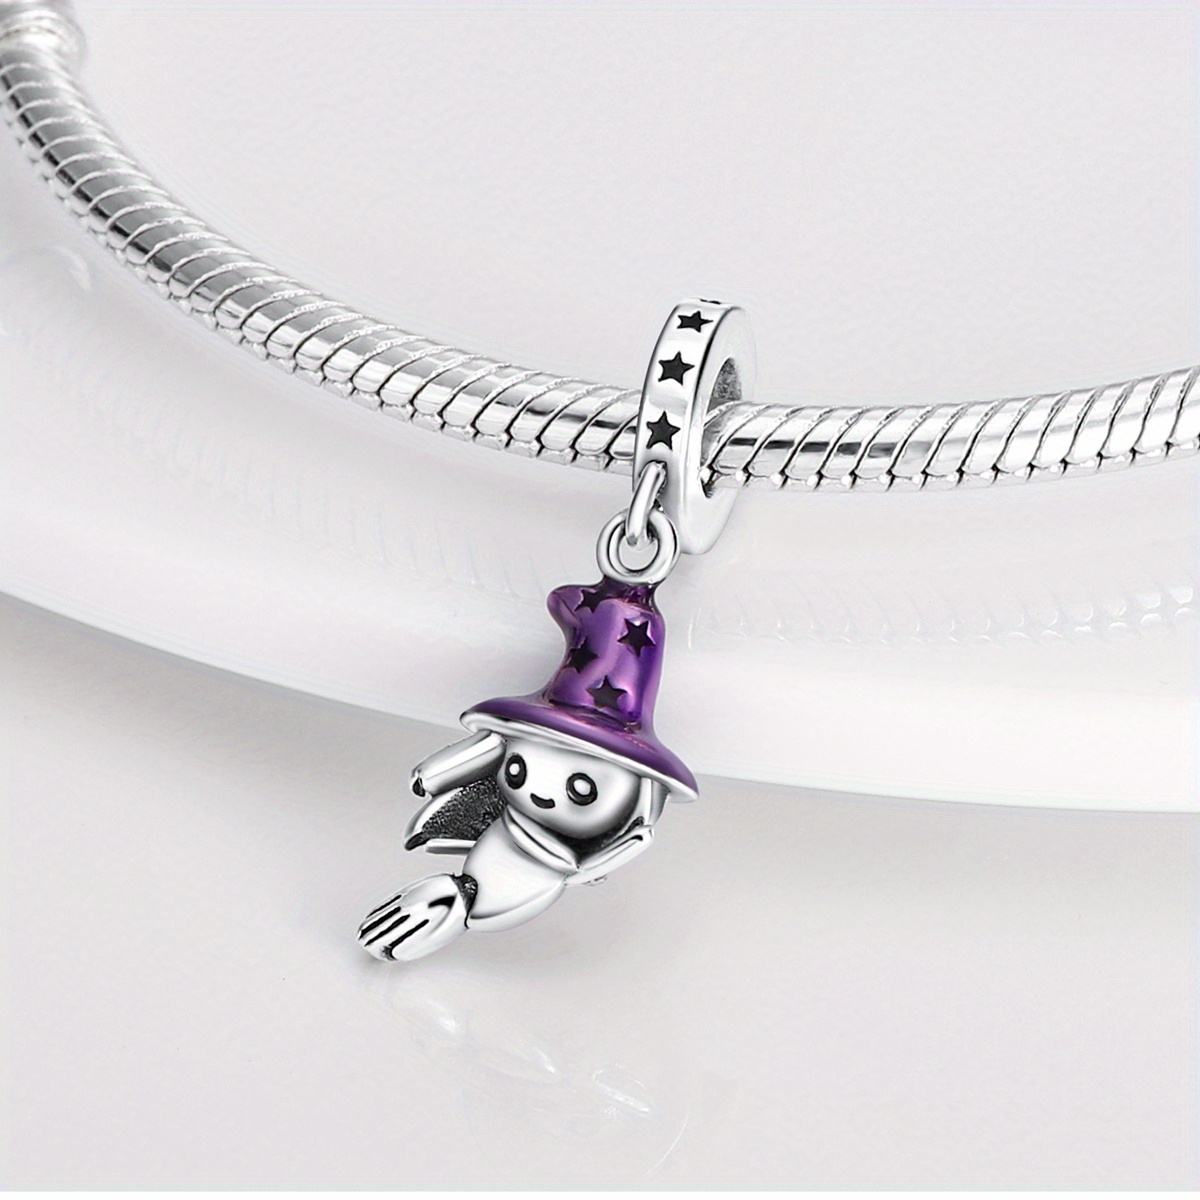 Witchy Charms Jewelry Making  Spooky Charms Jewelry Making - 24pcs Charms  Pendant - Aliexpress